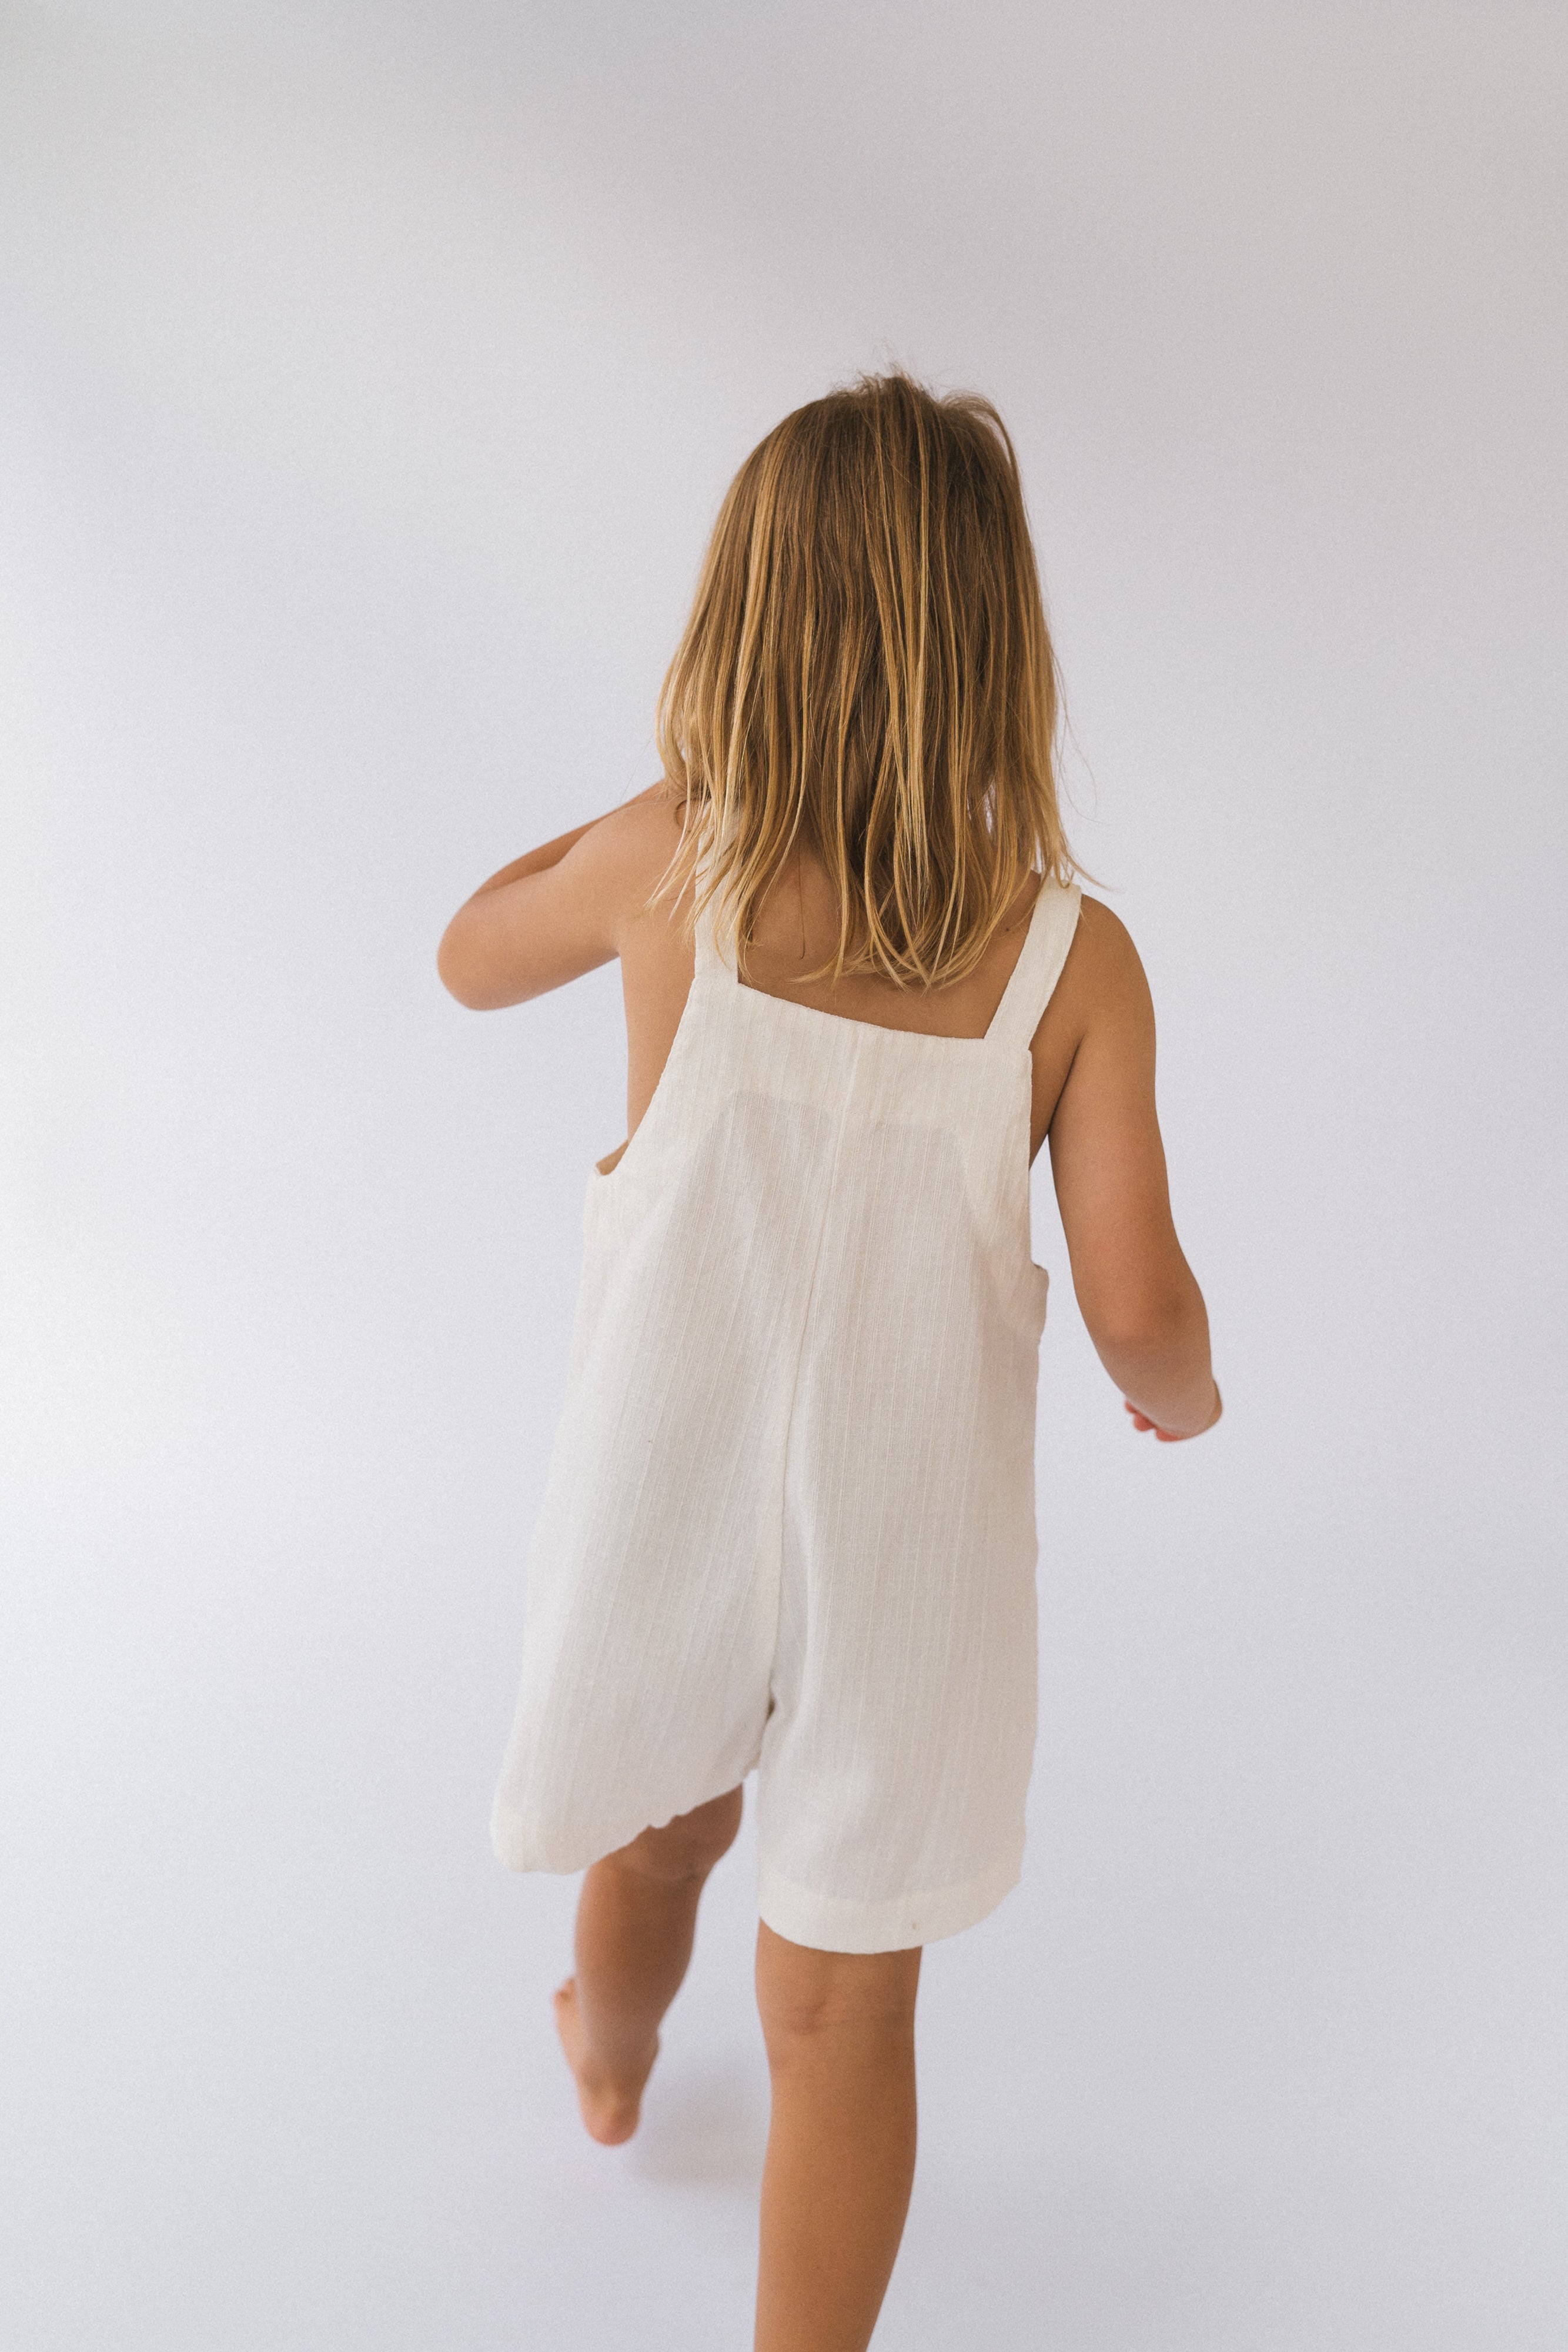 Unisex Short Marlow Overalls or Dungarees| White